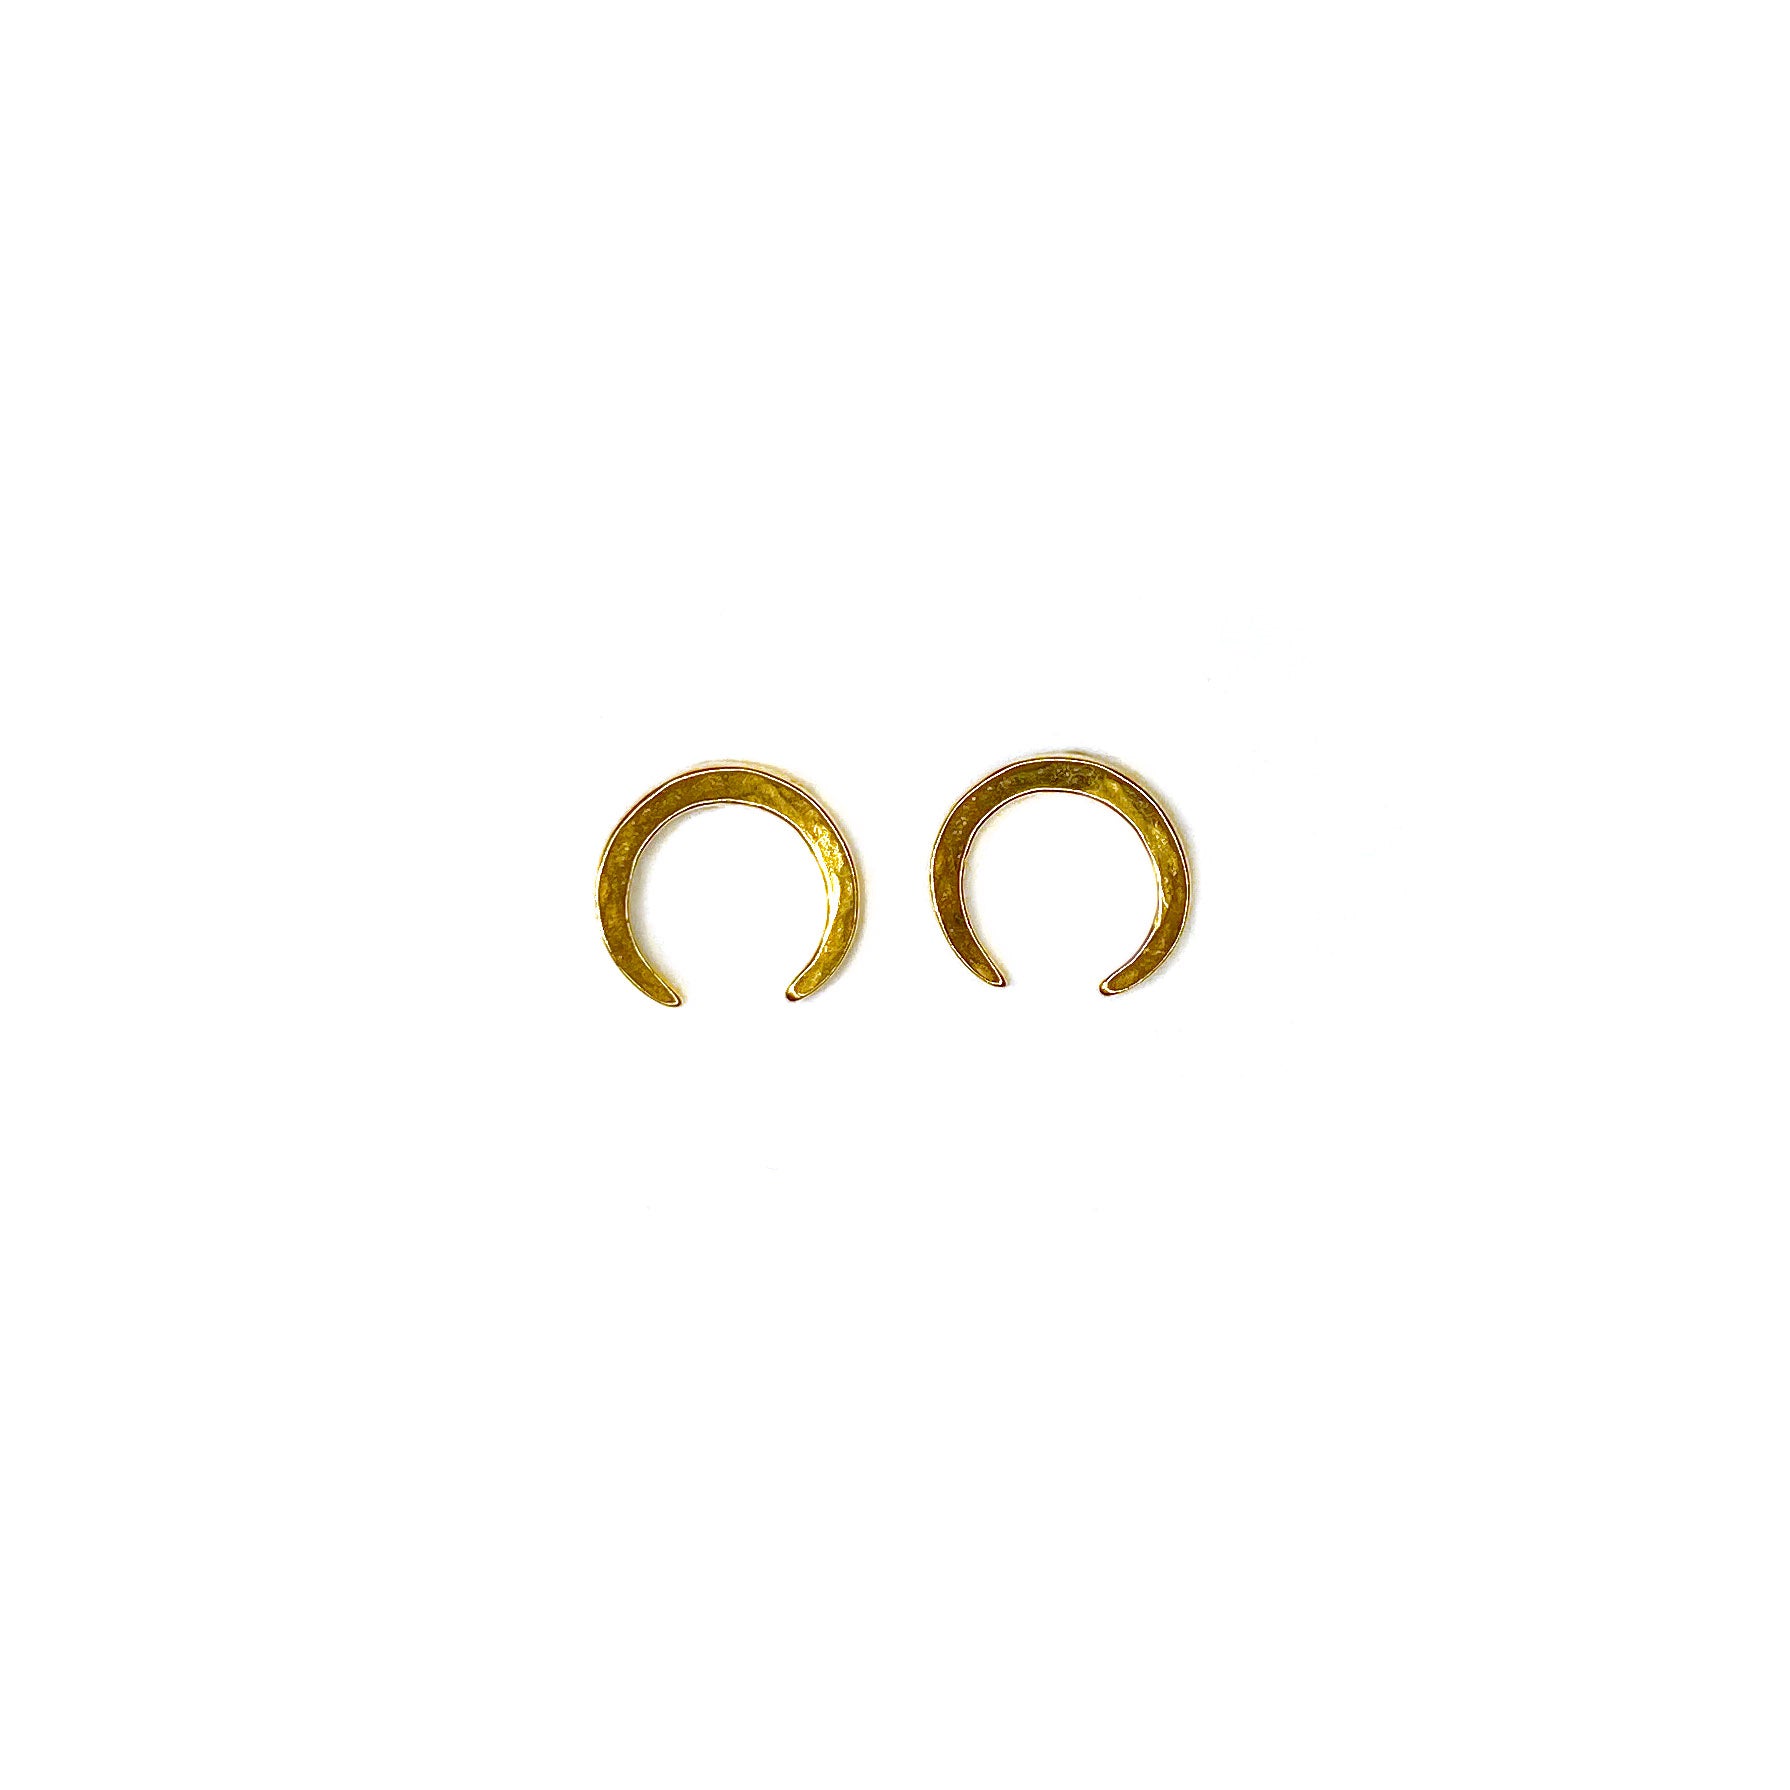 Deep crescent moon shaped hammered gold studs on a white background